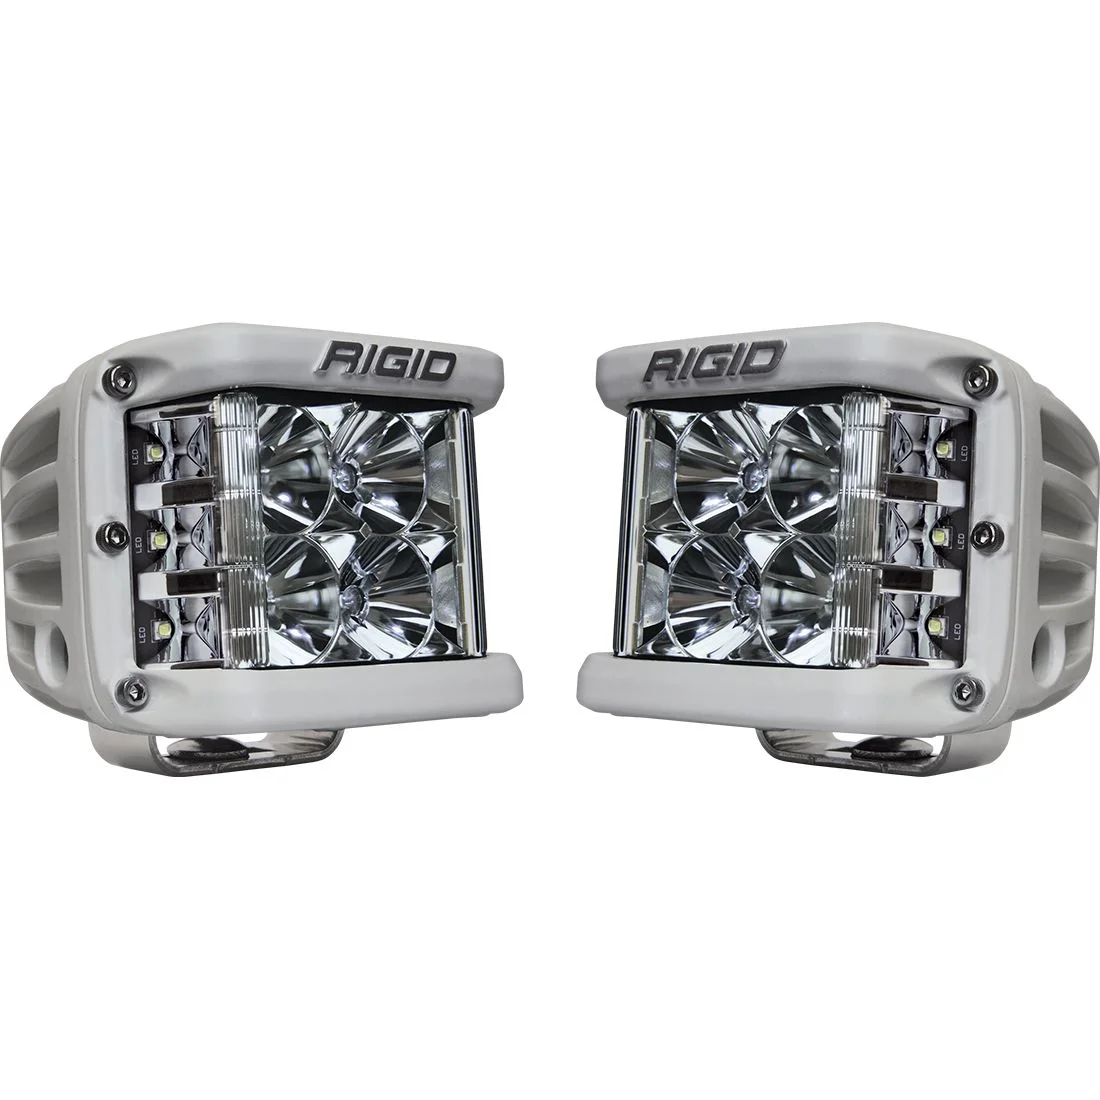 Rigid Industries D-SS Series Pro WHITE CASE SIDESHOOTERS (SOLD IN PAIRS)